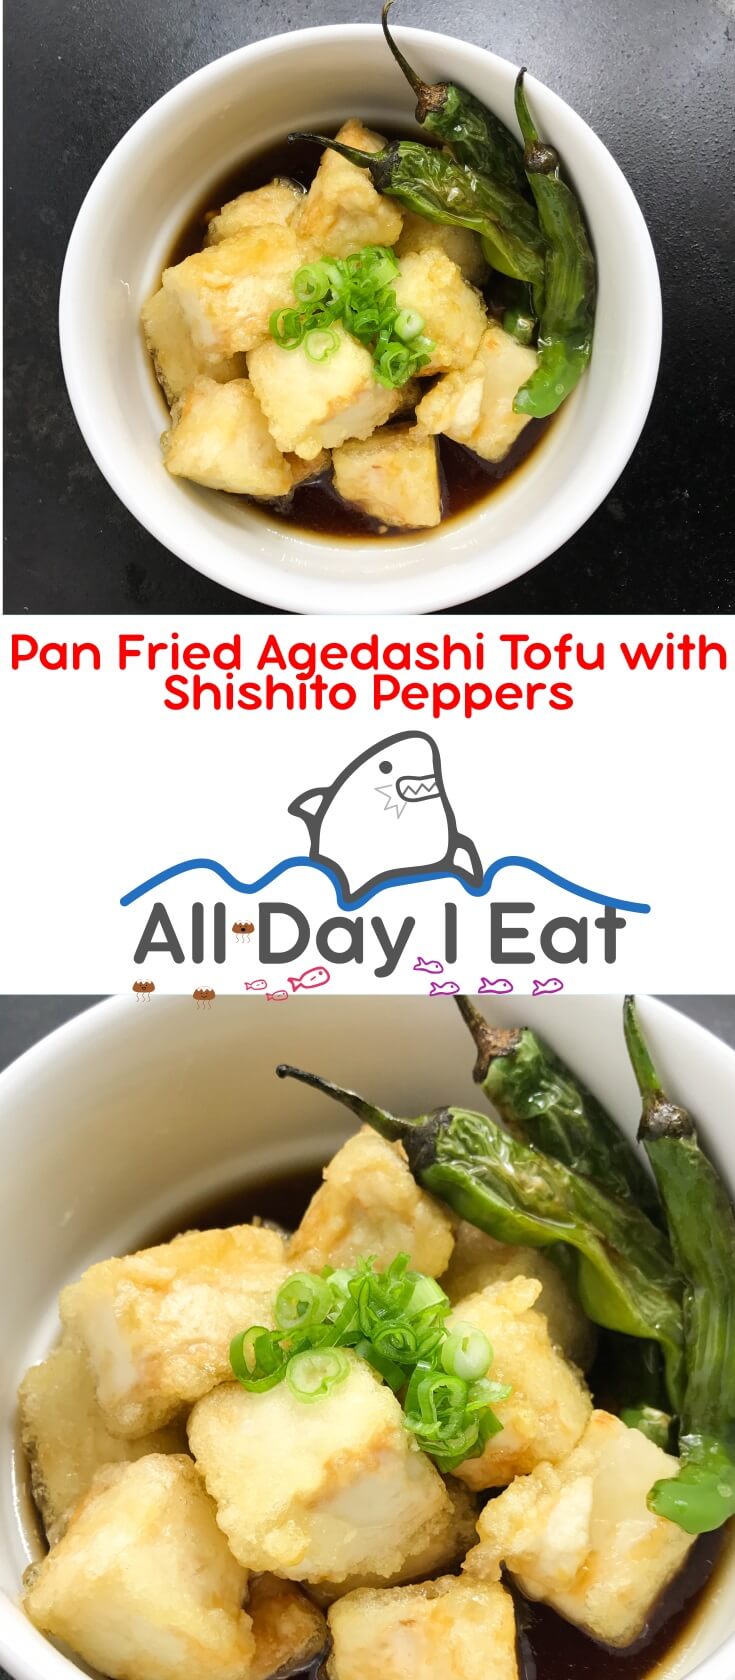 Pan Fried Agedashi Tofu with Shishito Peppers in a Dashi Broth. Warm tofu with a crispy skin and soft interior that melts in your mouth!! | www.alldayieat.com